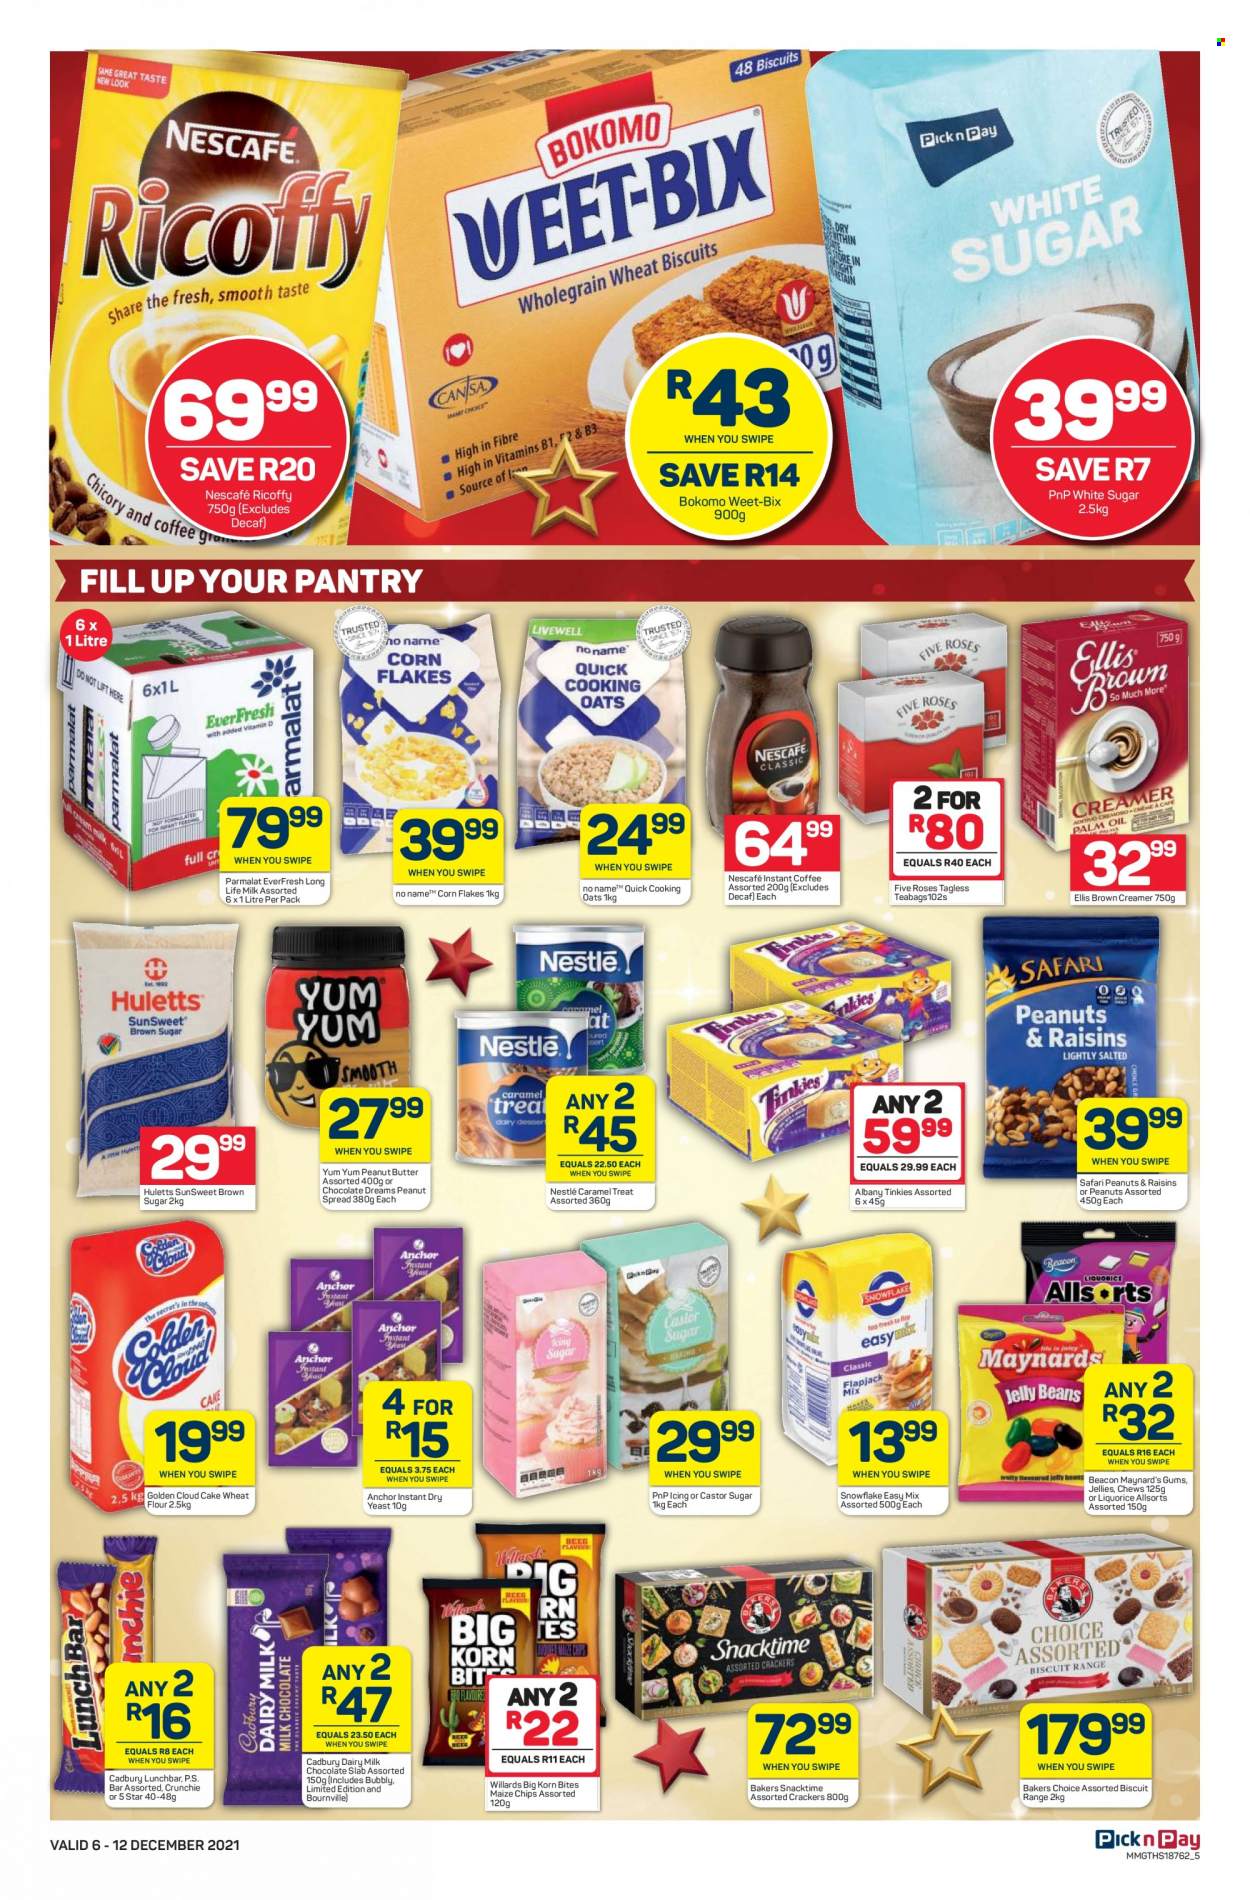 Pick n Pay specials - 12.06.2021 - 12.12.2021. 